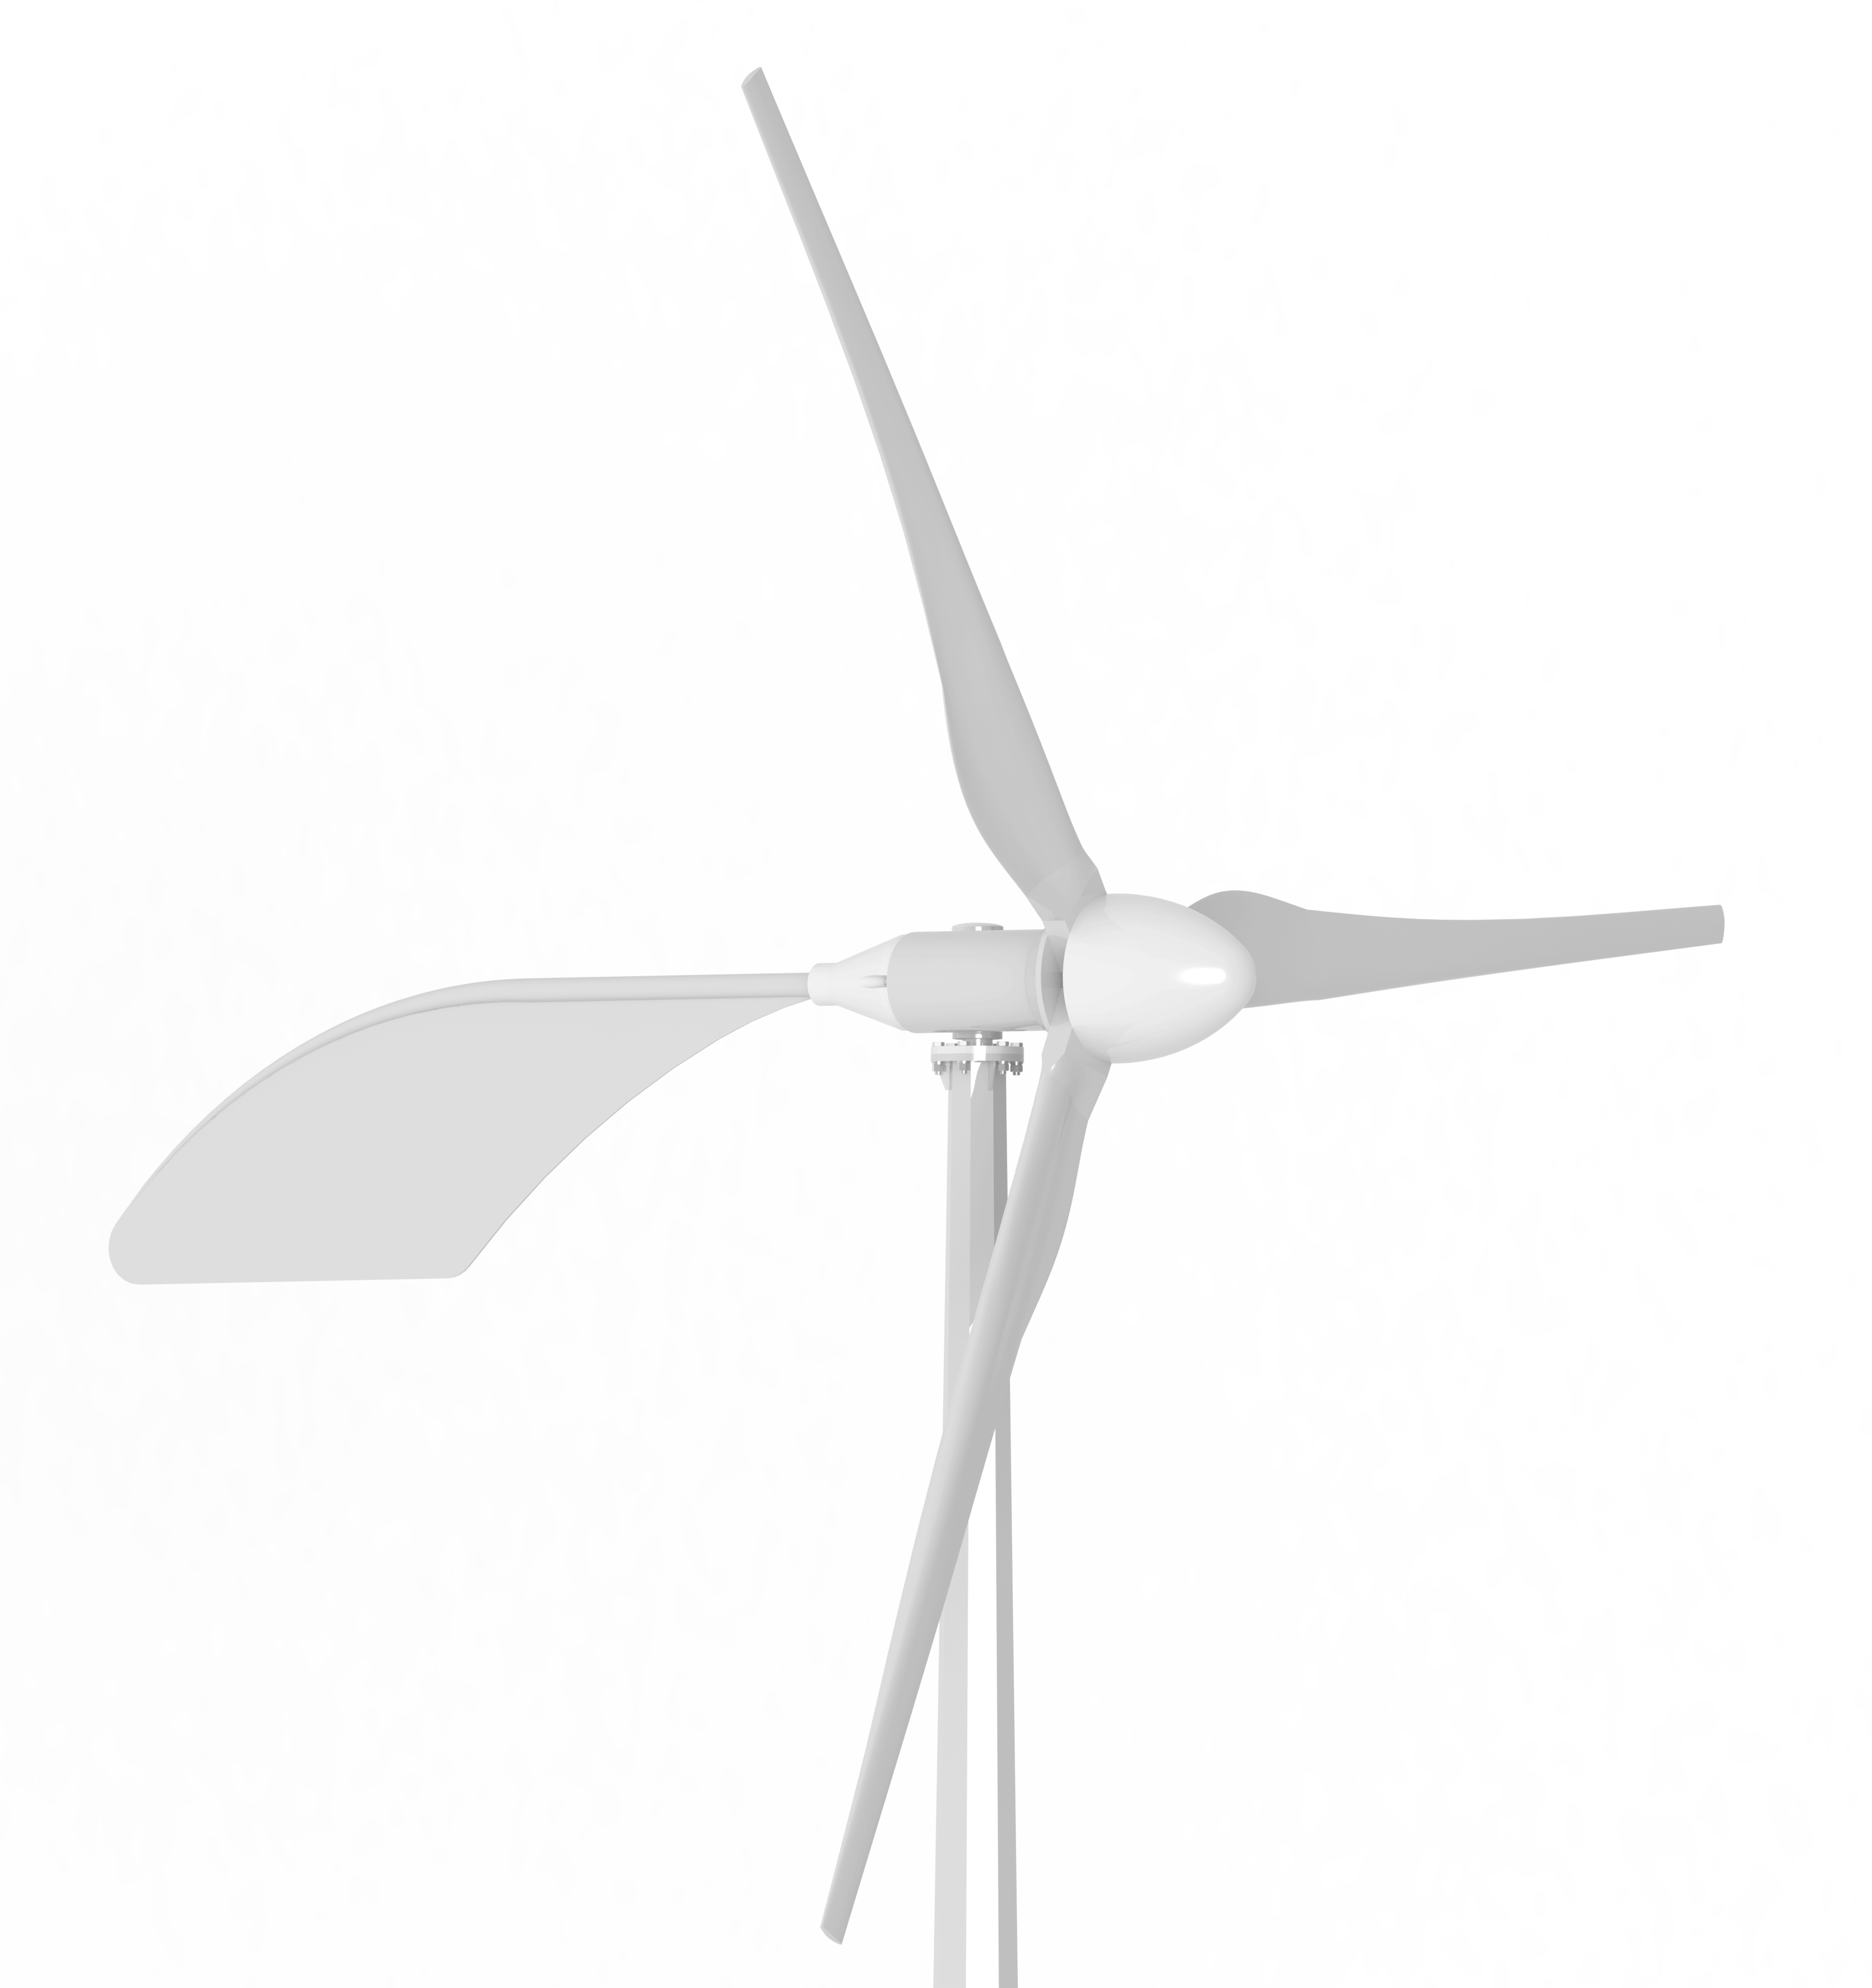 GH-1KW Horizontal Axis Wind Turbine Featured Image